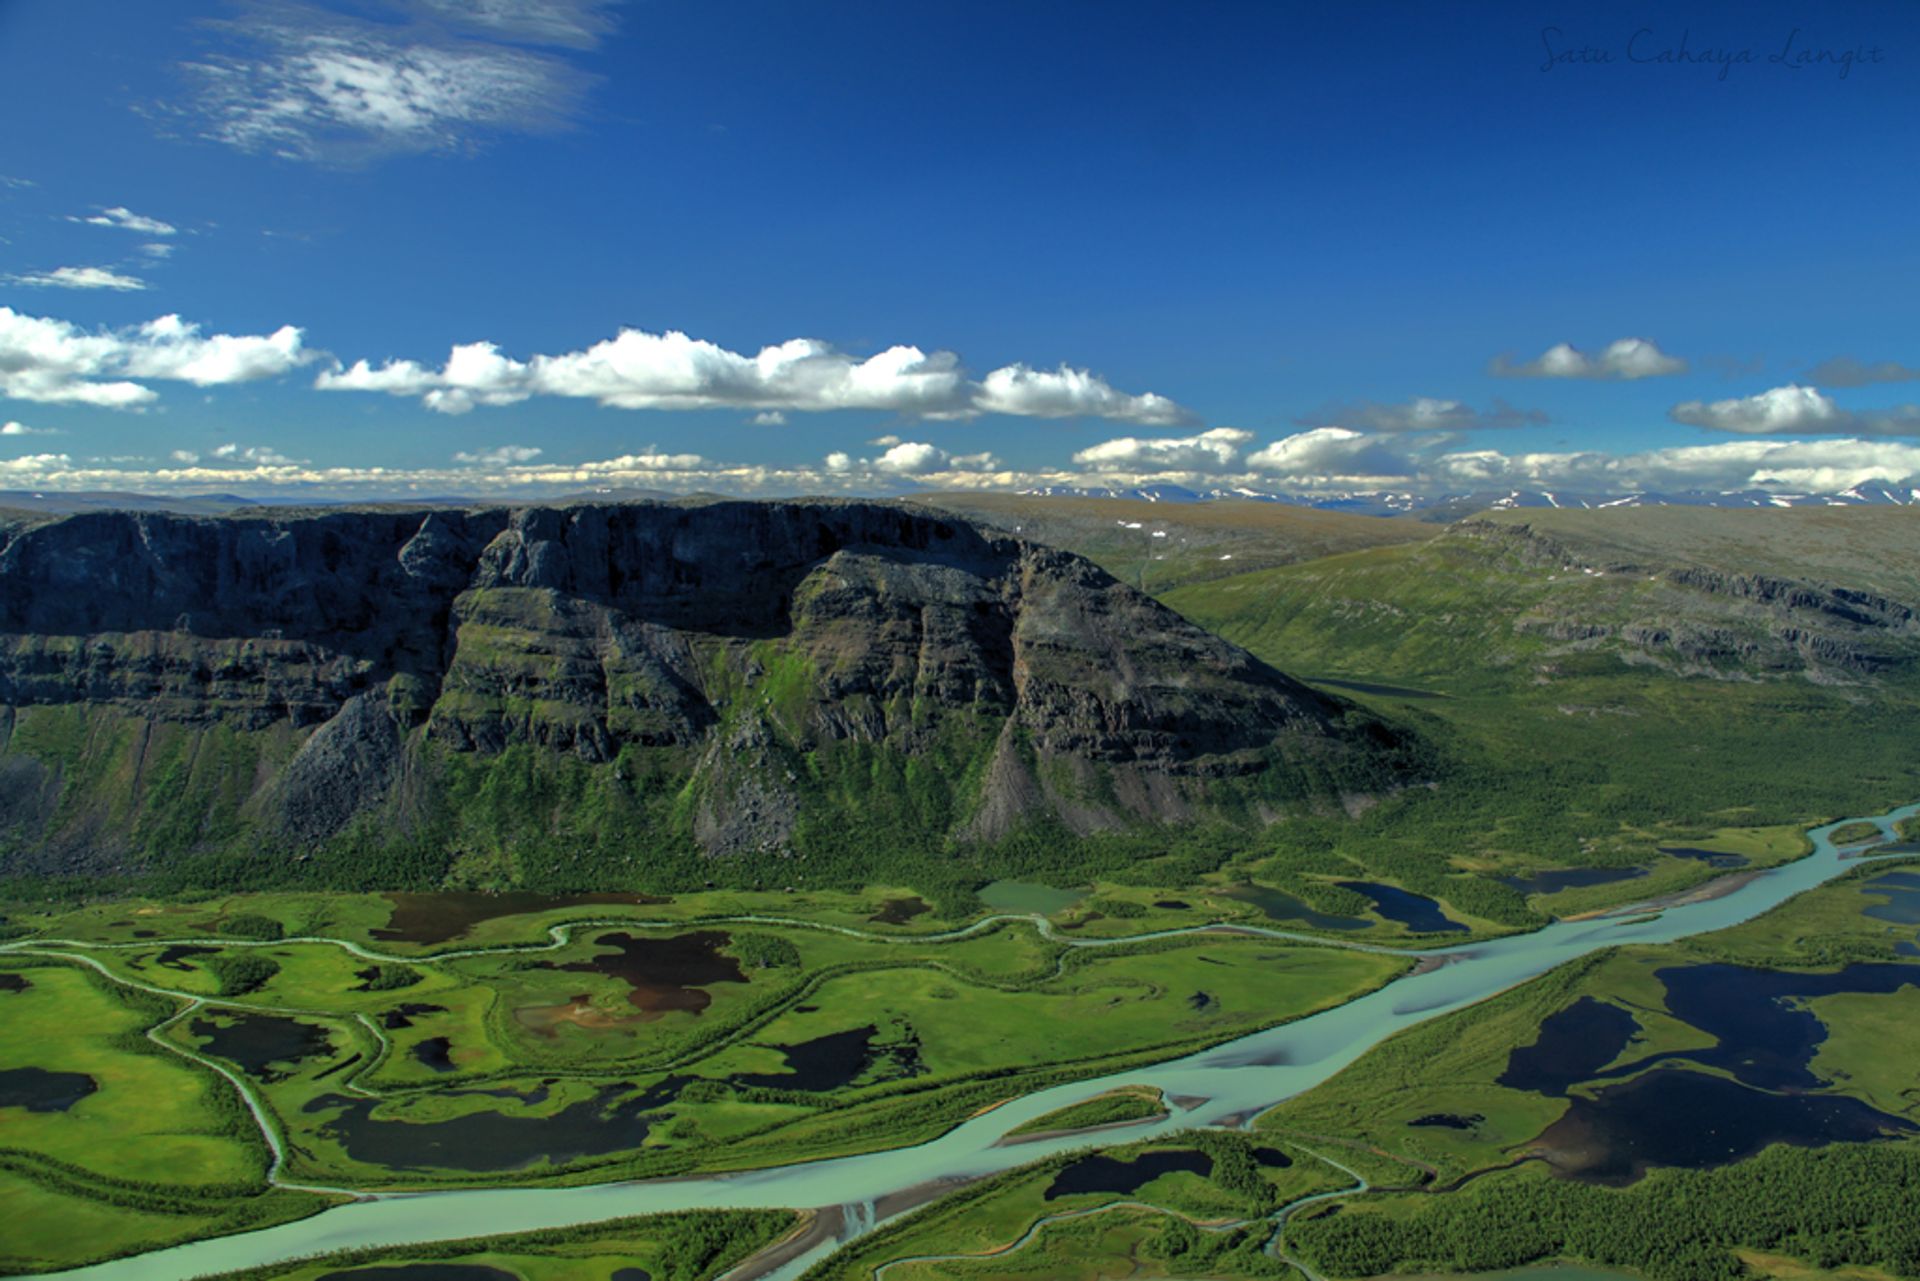 Wide shot image of a valley.